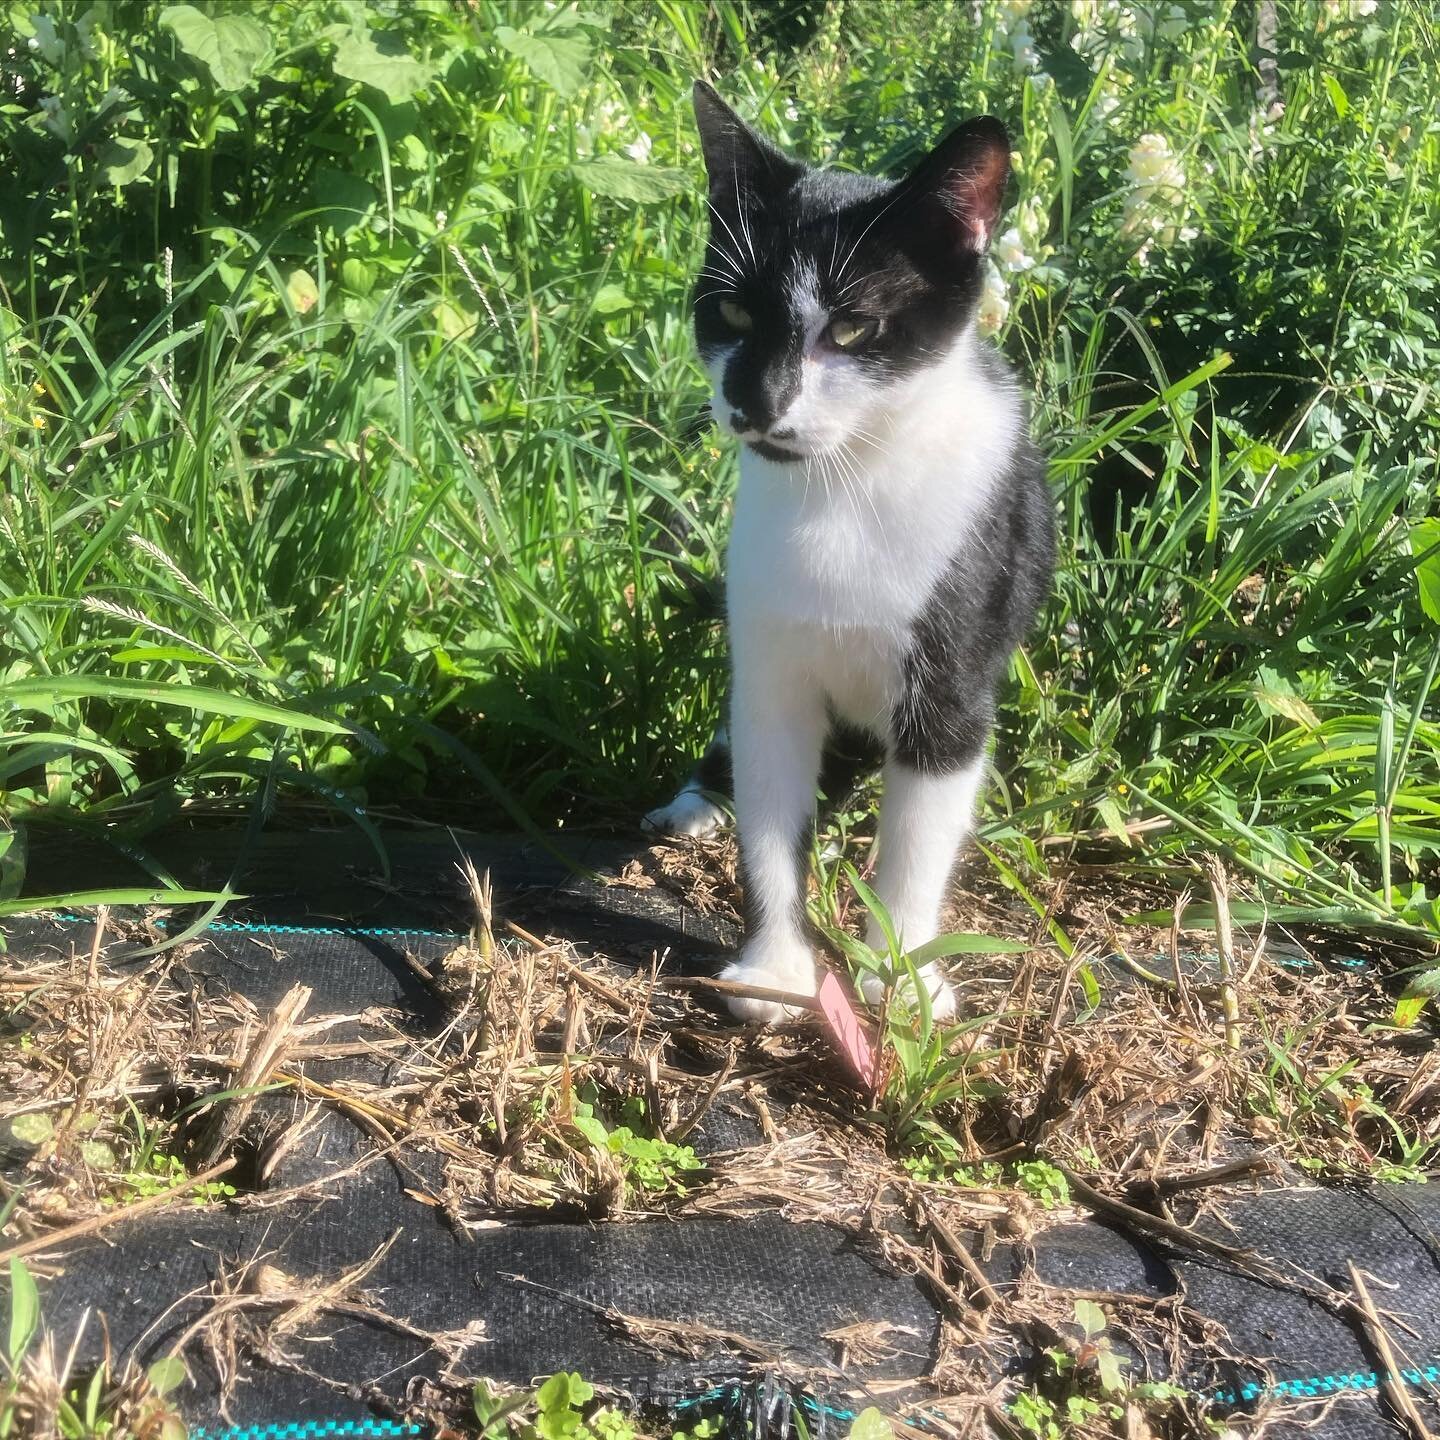 Happy Sunday!  This is our garden kitty &lsquo;Stache. She has a sweet little mustache marking on her cutie face. She helps keep down the rodent pressure and increases joy as she purrs. Gotta watch you back though. She likes to climb up you and sit o